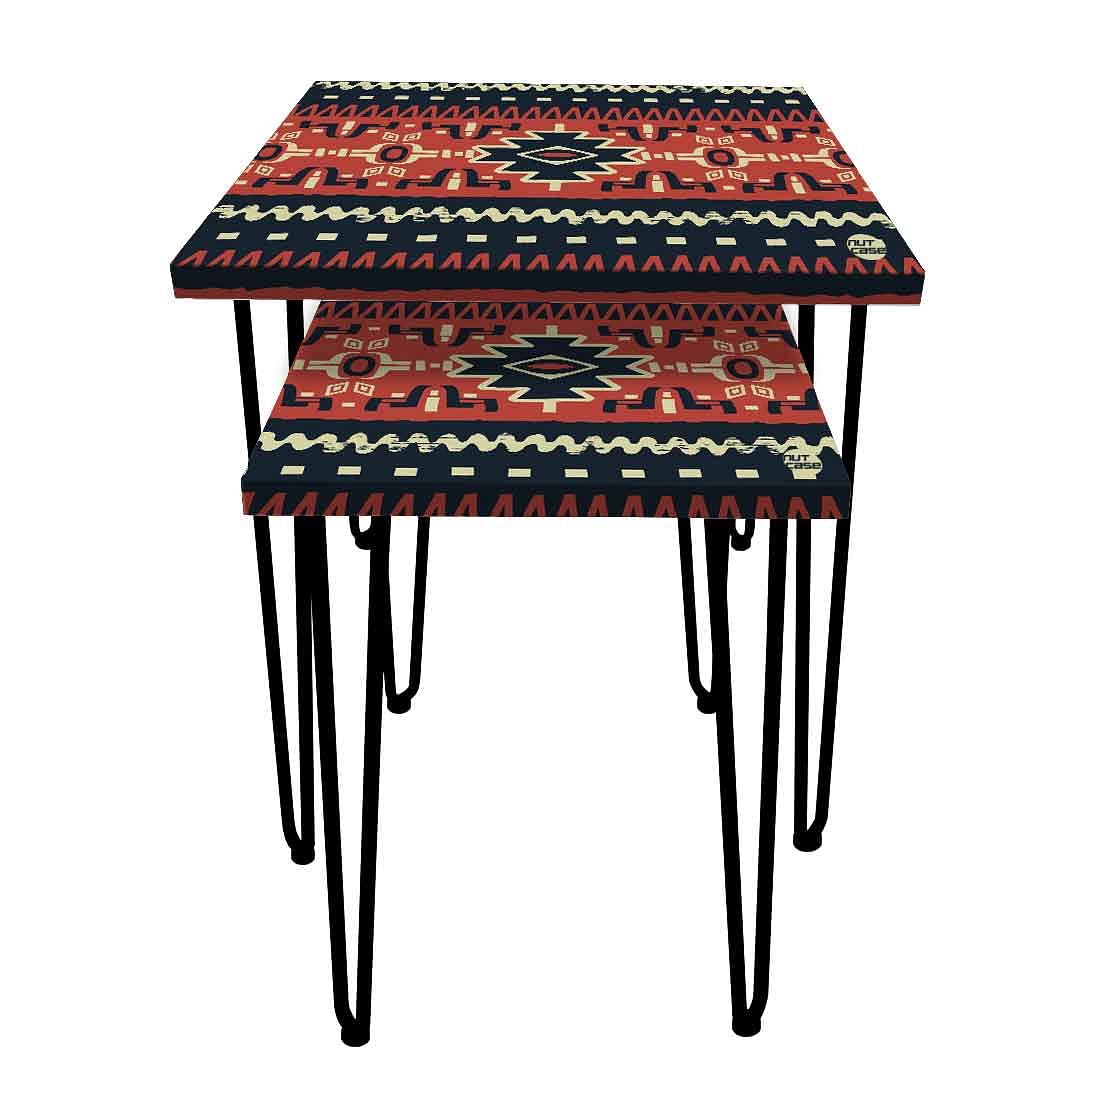 Nesting Tables Set of 2 for Living Room Home Decor - Mexican Pattern Nutcase